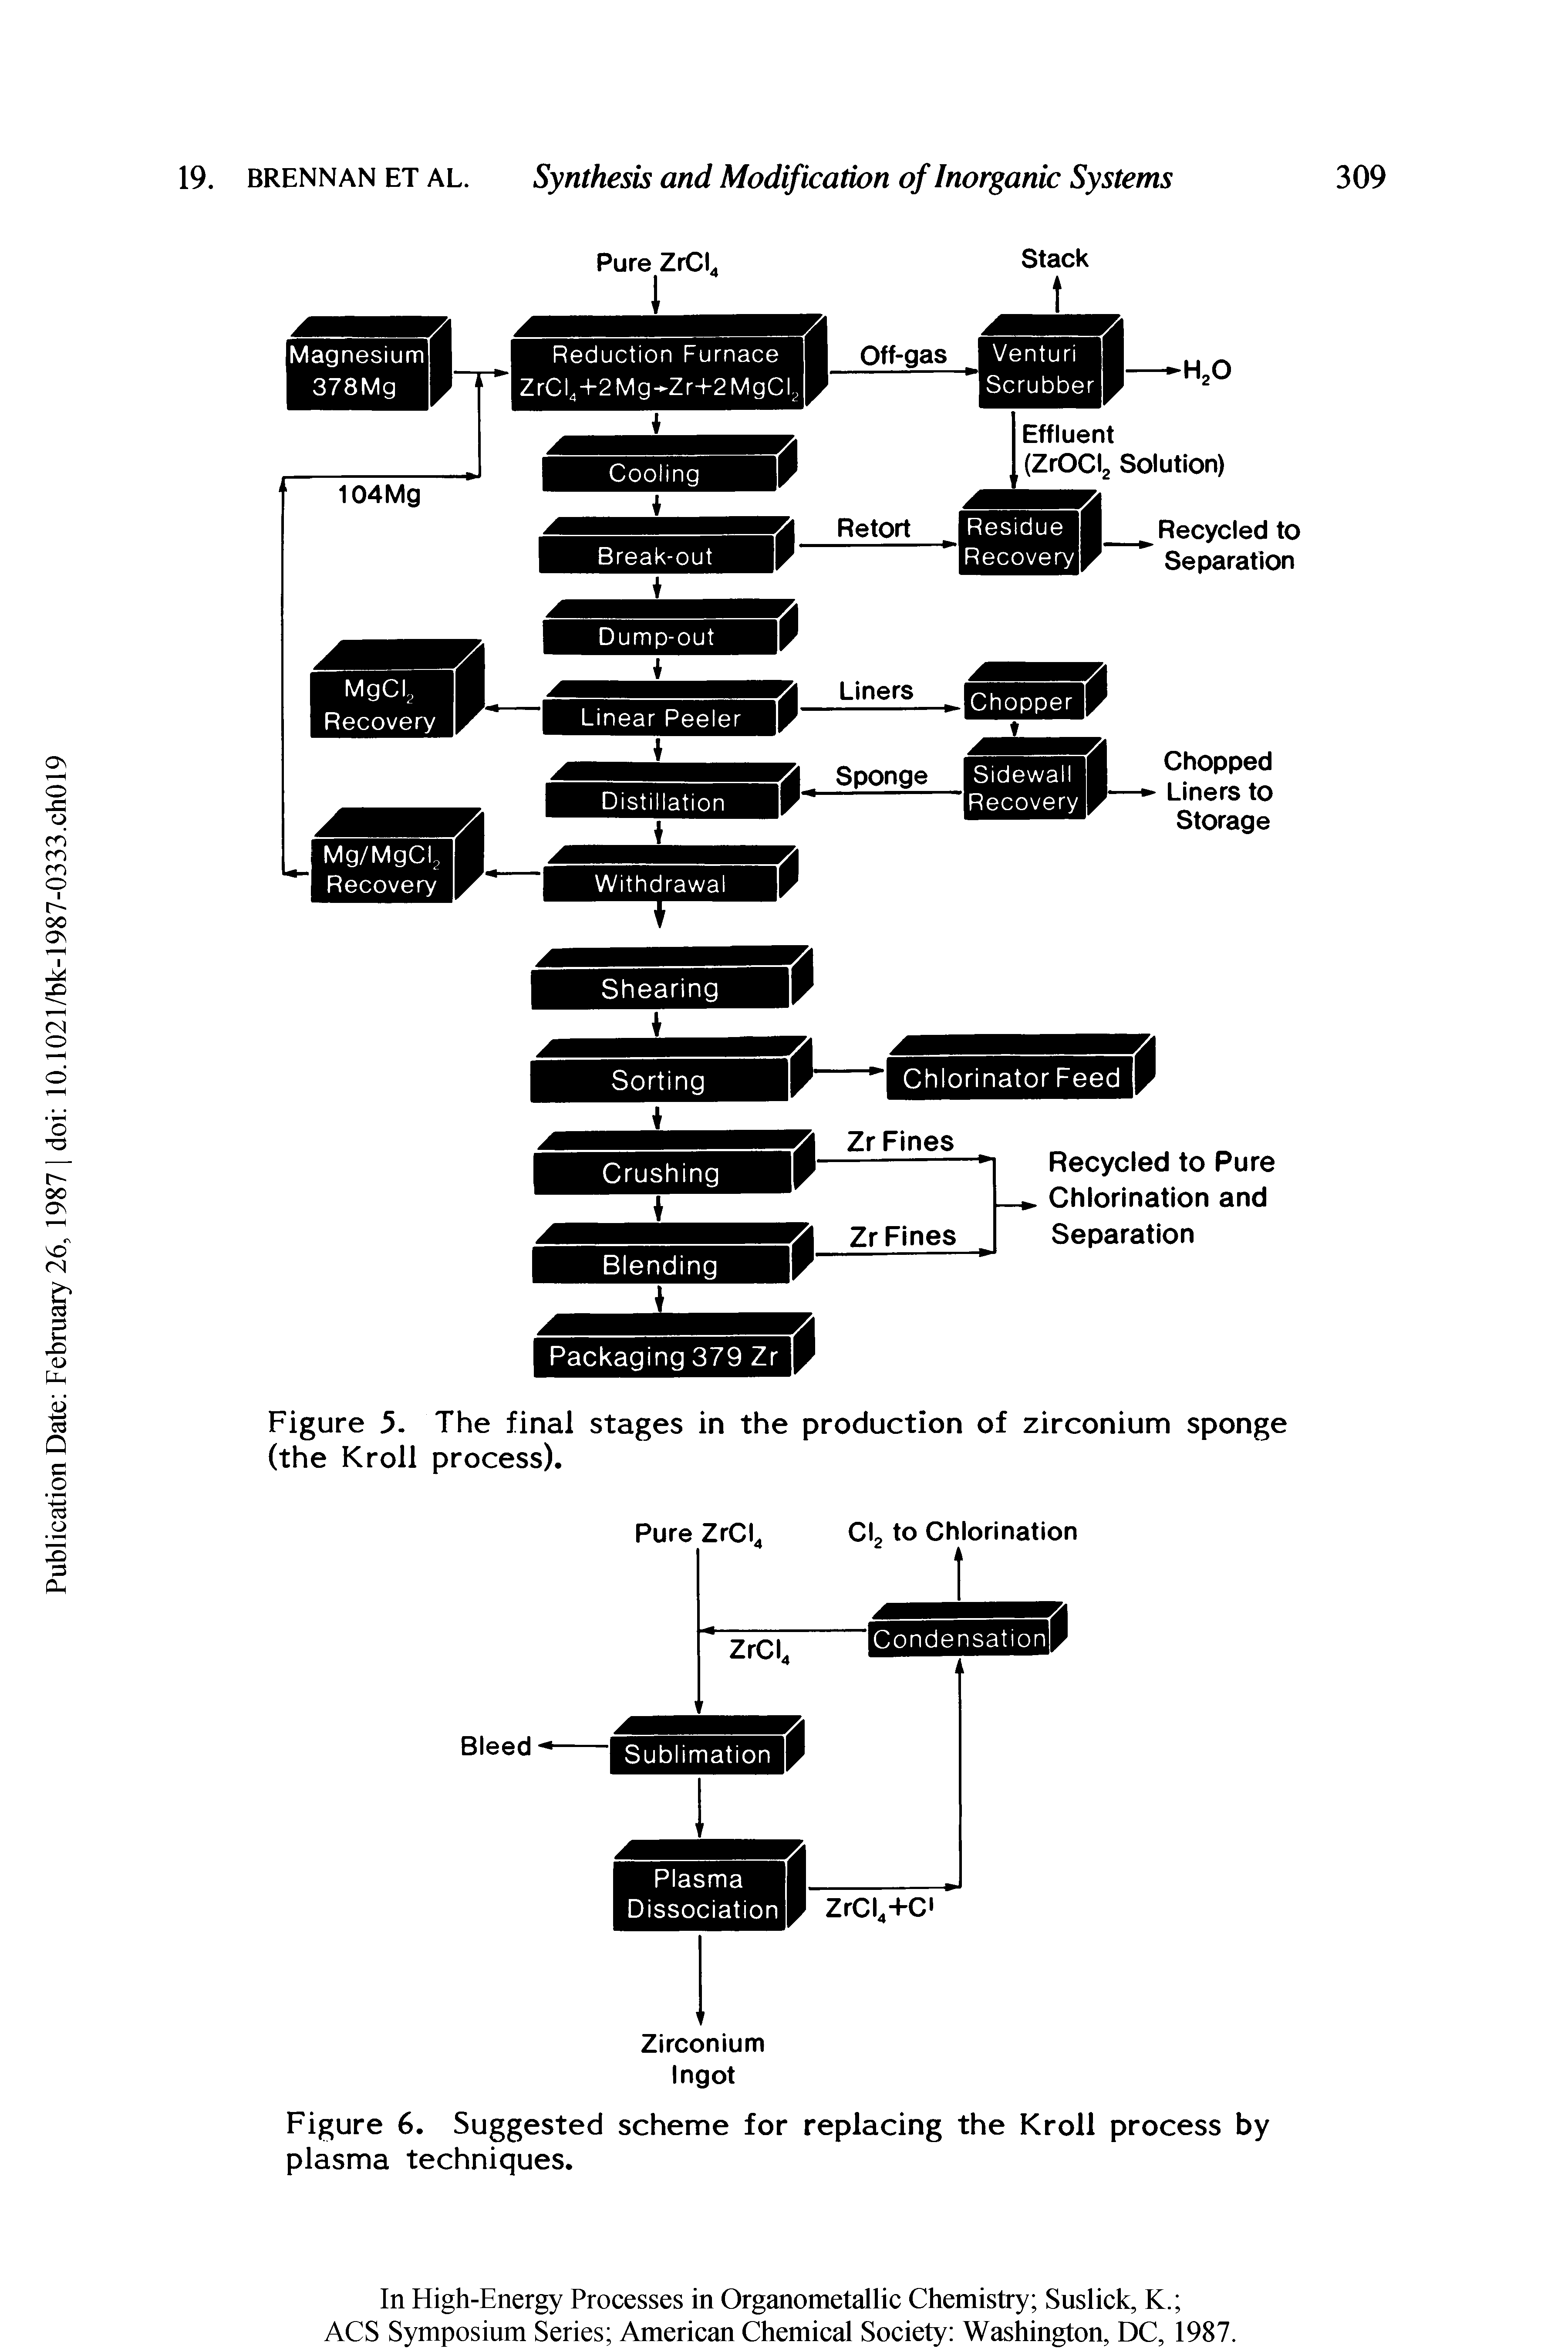 Figure 6. Suggested scheme for replacing the Kroll process by plasma techniques.